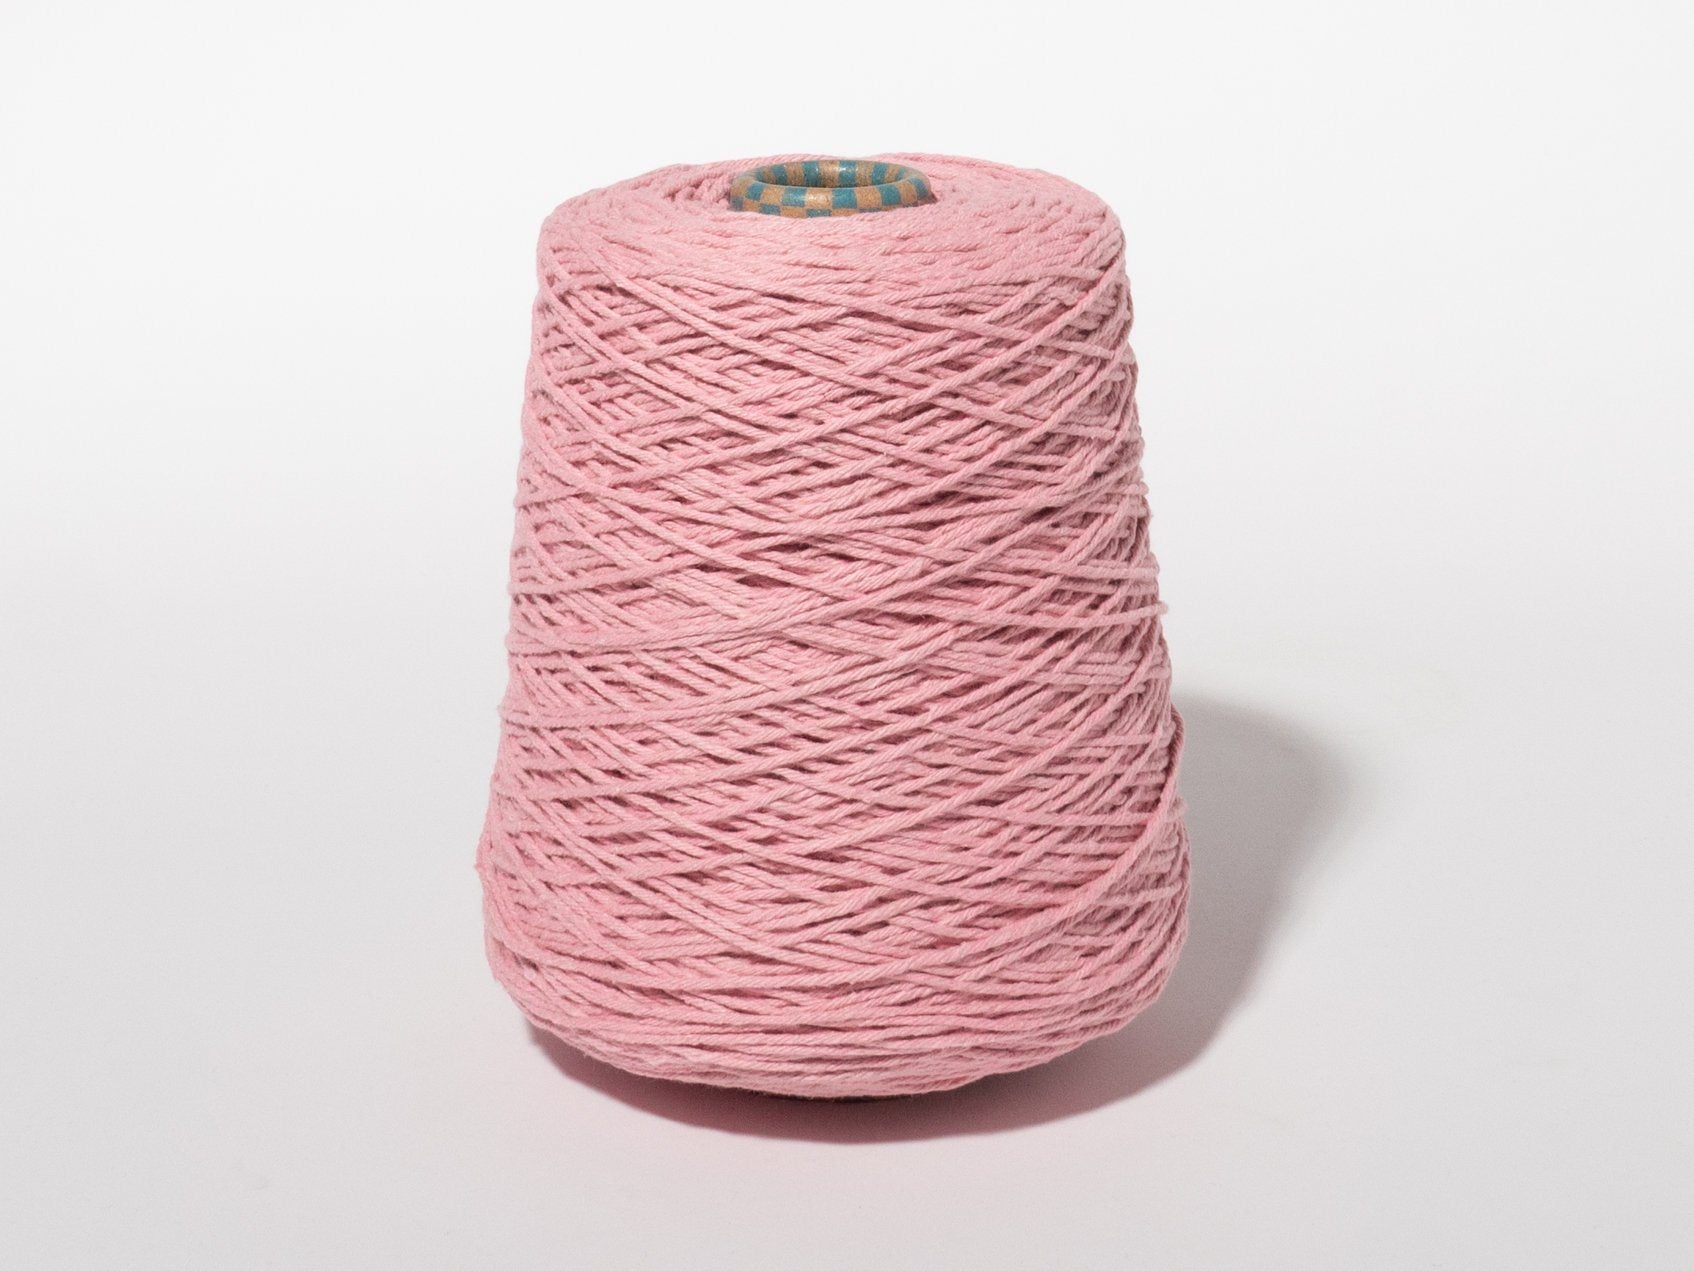 Reflect Eco-cotton Yarn Tuft the World Cotton Candy 